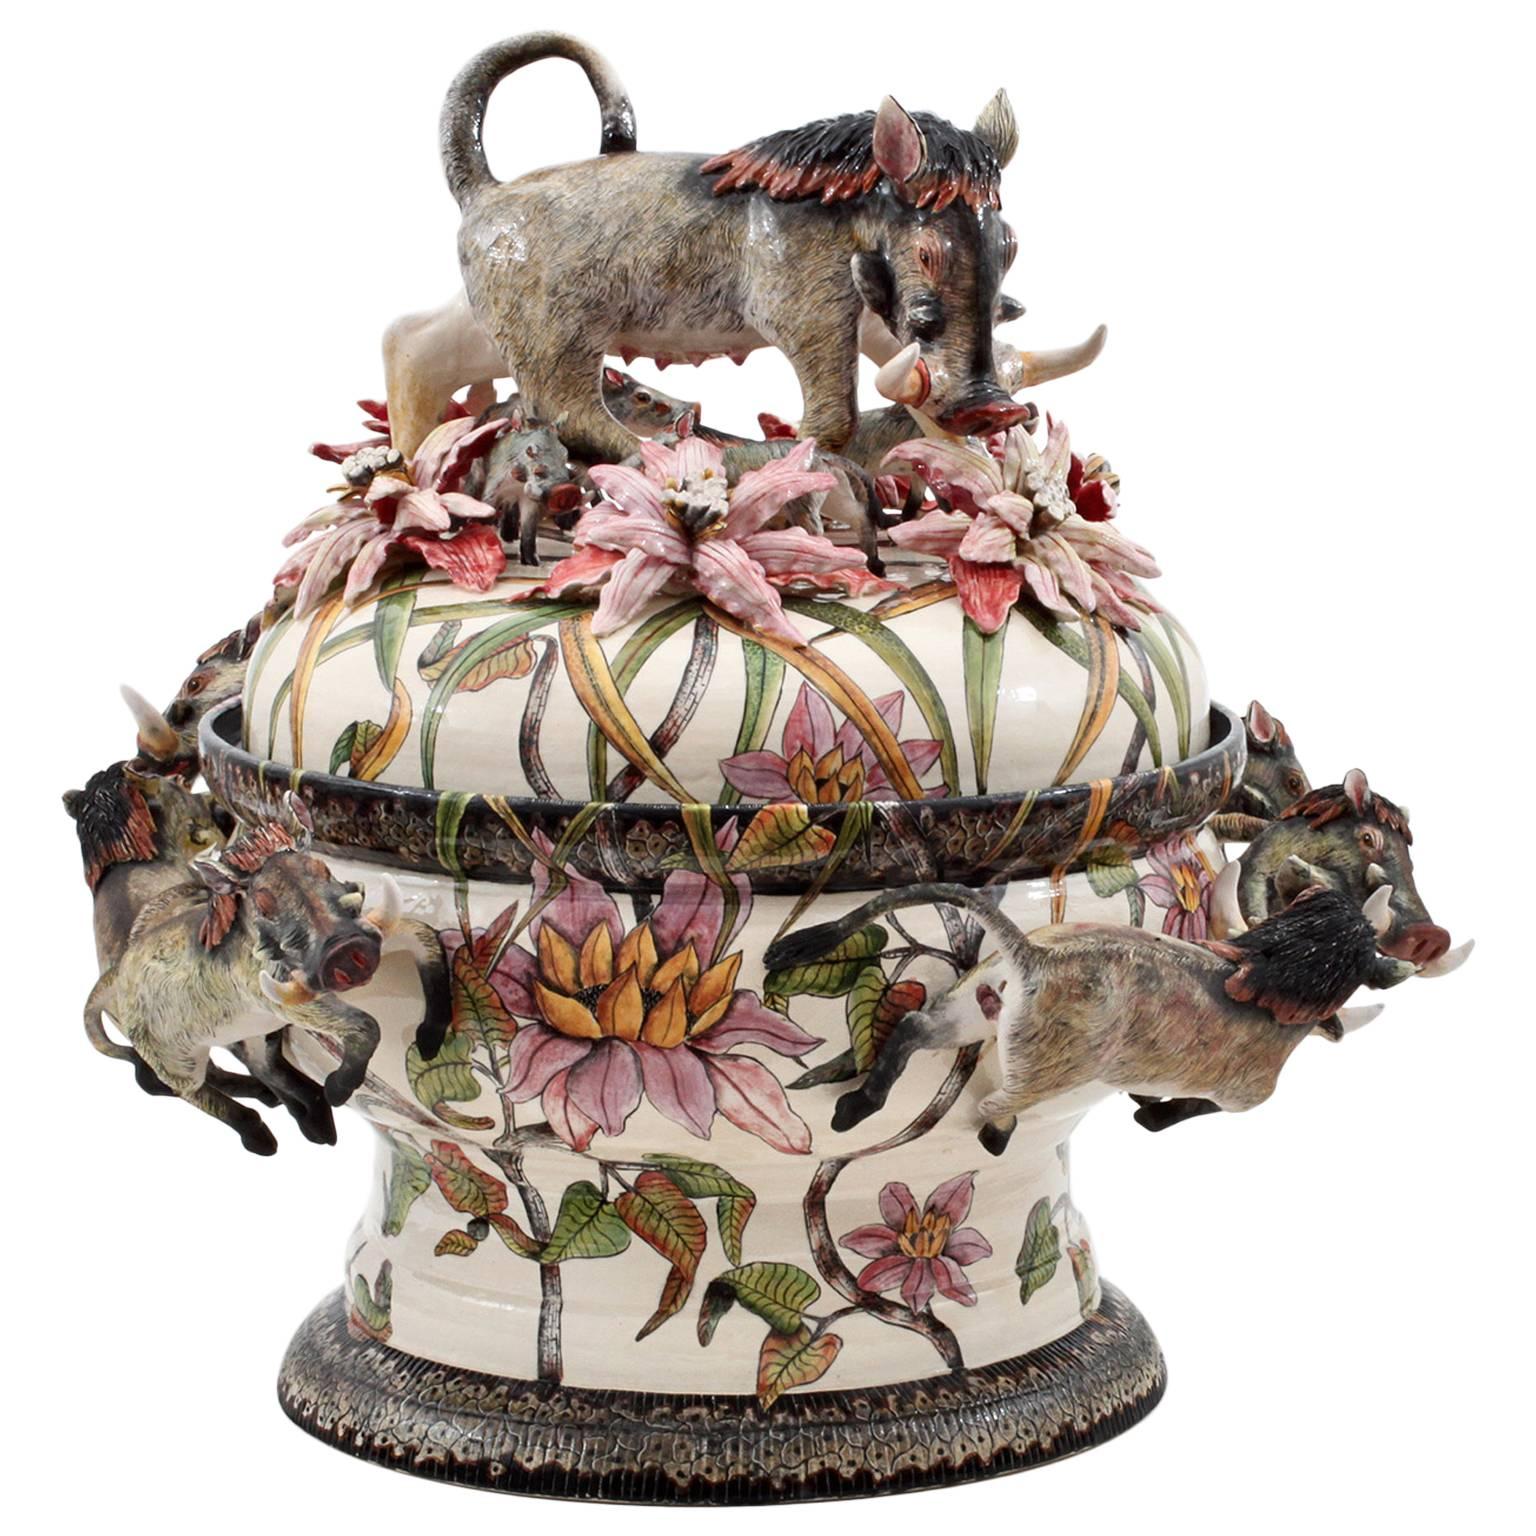 Warthog Tureen Centerpiece by Ardmore Ceramics from South Africa